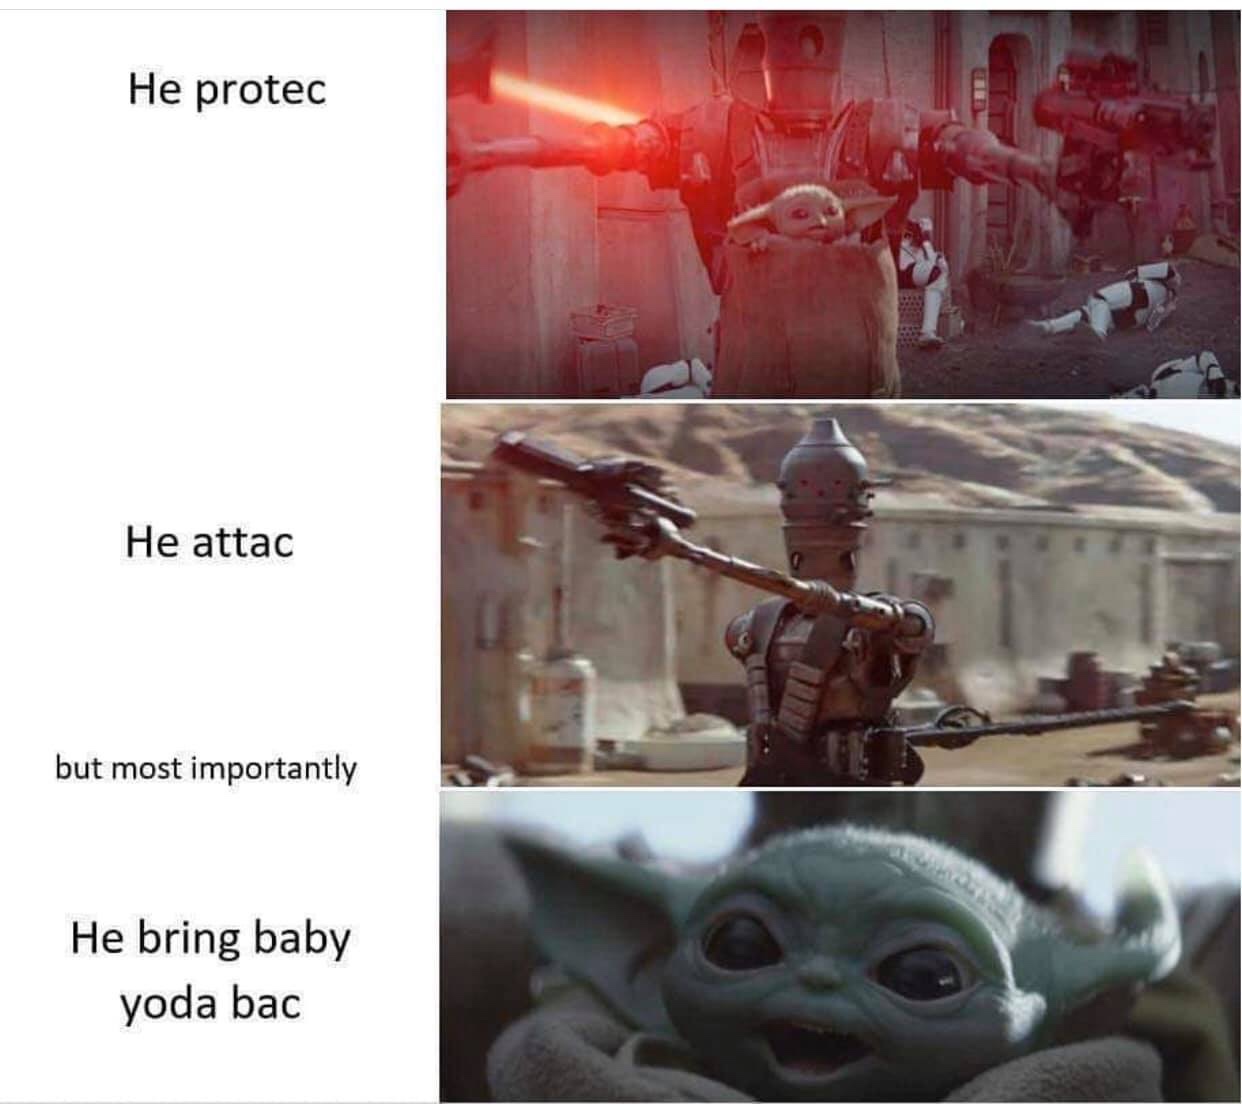 photo caption - He protec He attac but most importantly He bring baby yoda bac